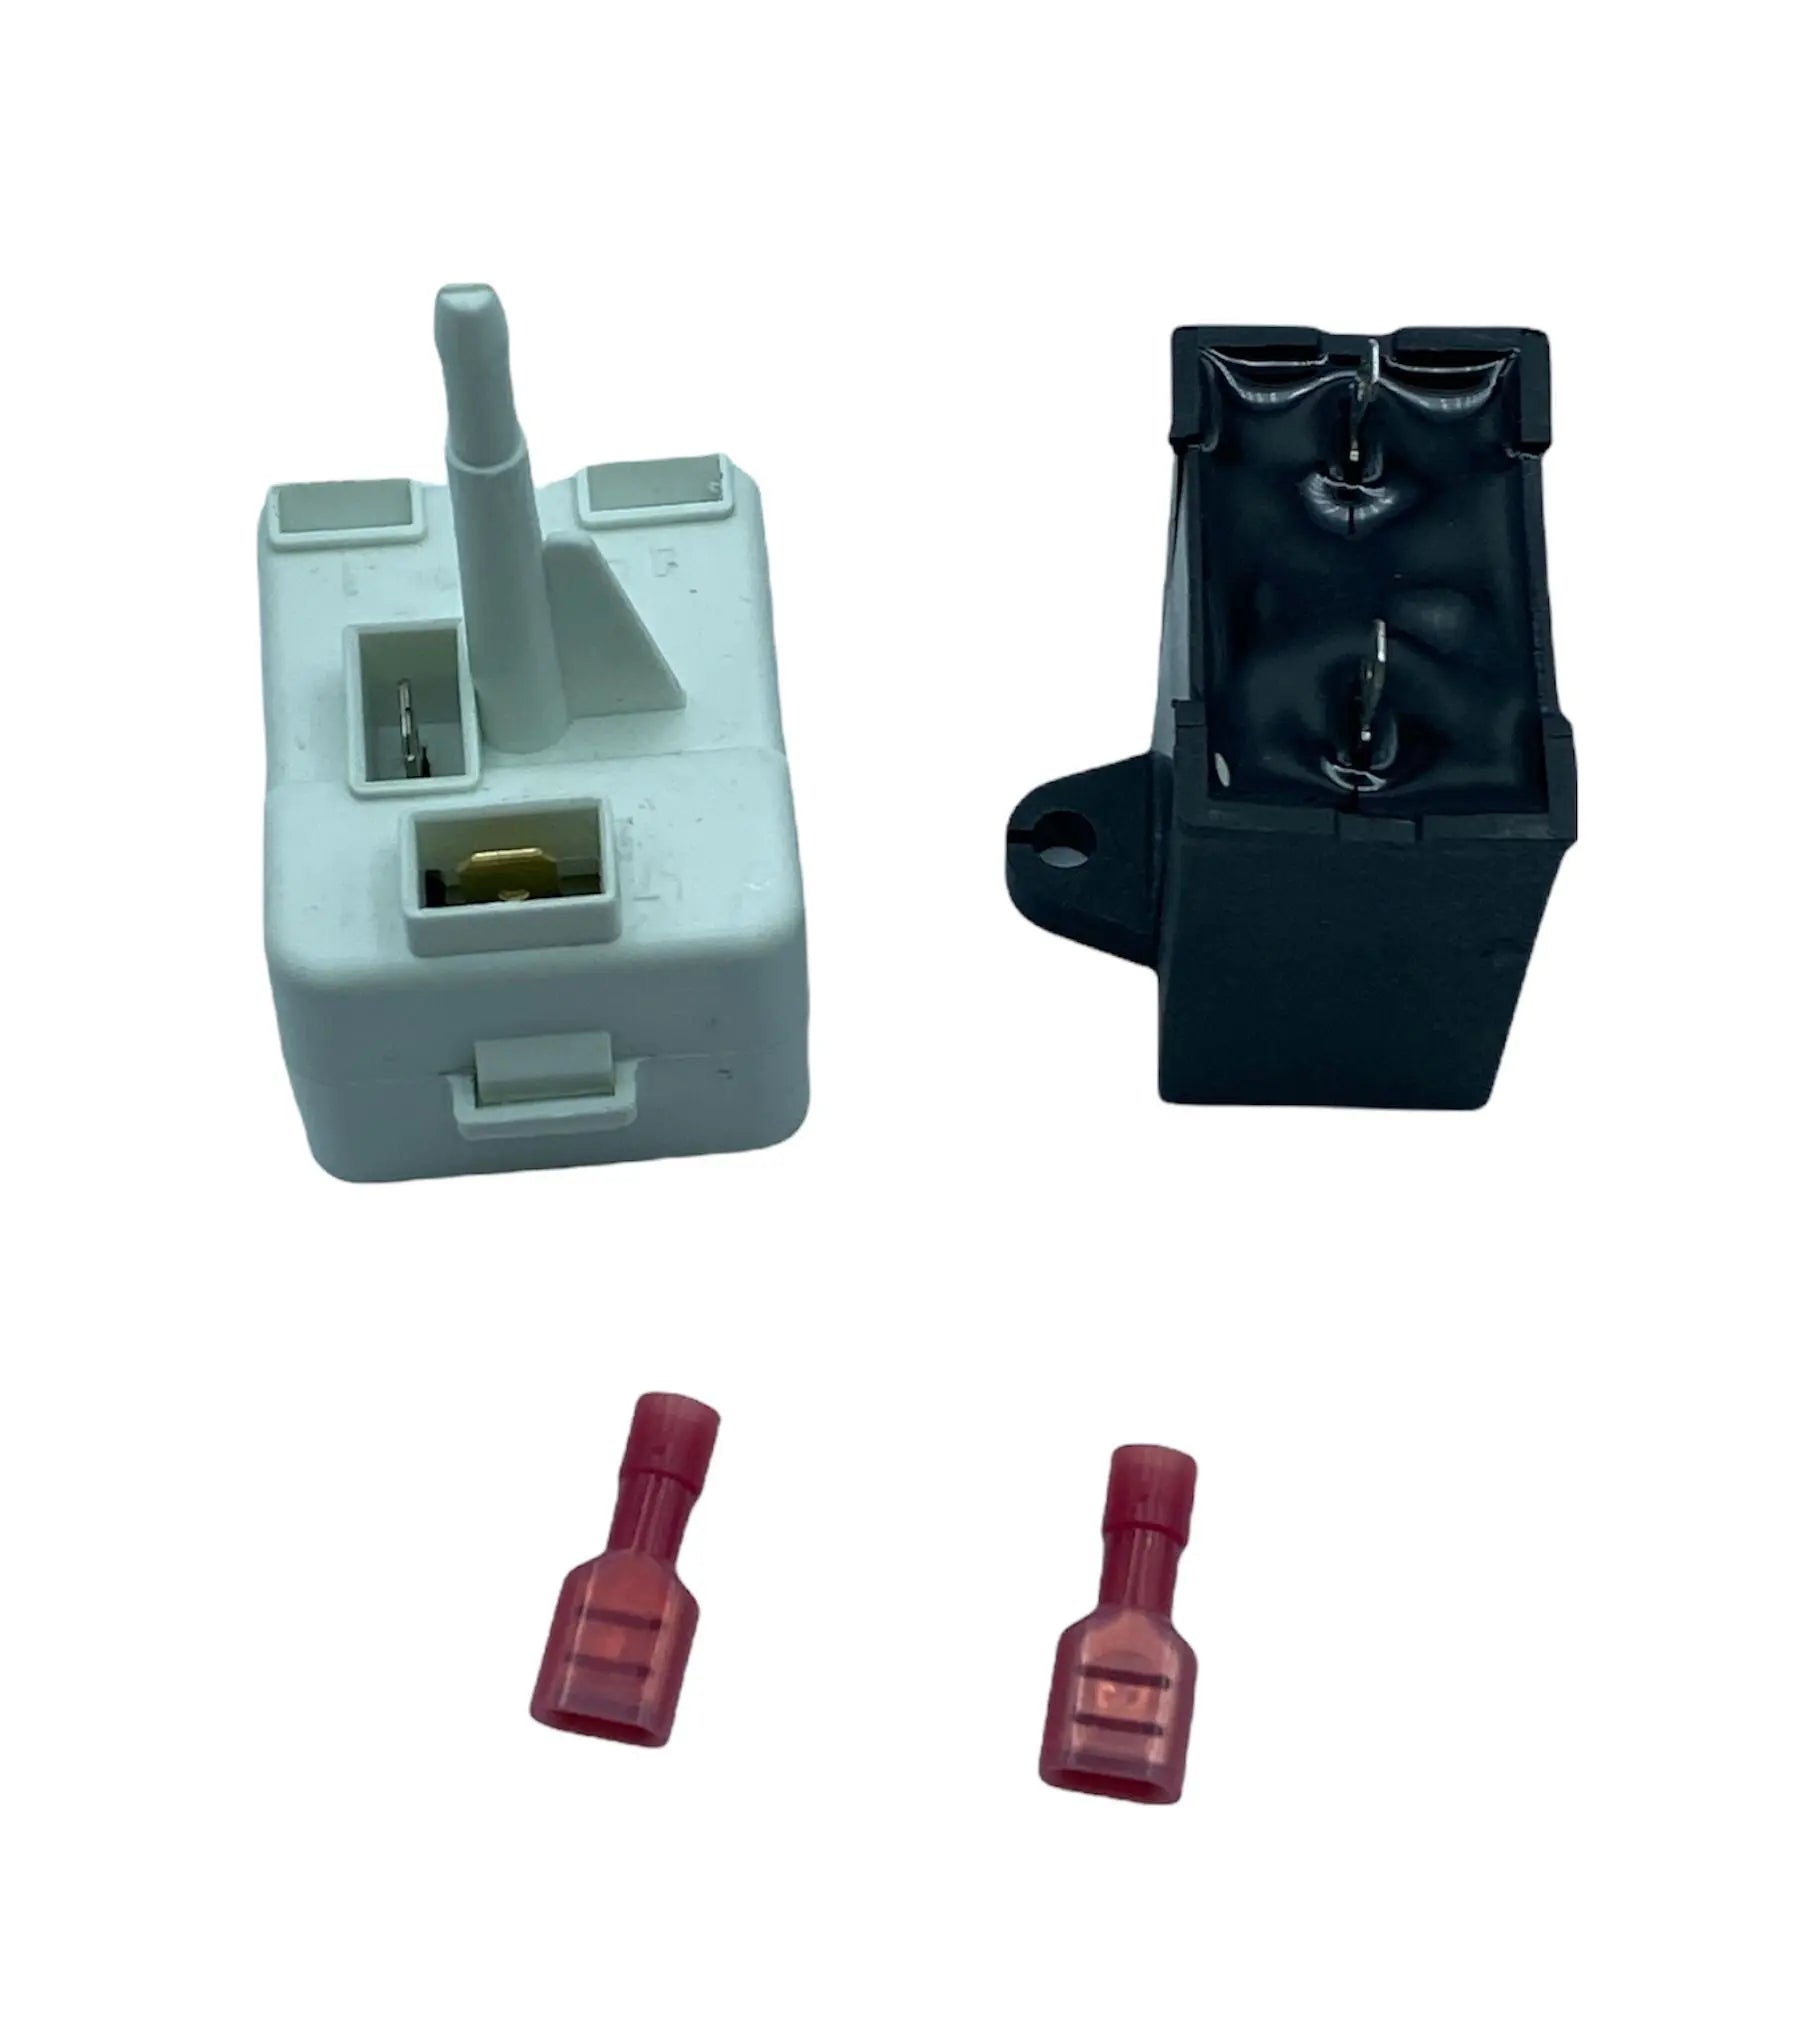 G.E Refrigerator Start Device Kit - WR08X10102 or WG03F03356 , REPLACES: 2216597 AP5322466 PS3501493 EAP3501493 PD00024959 INVERTEC